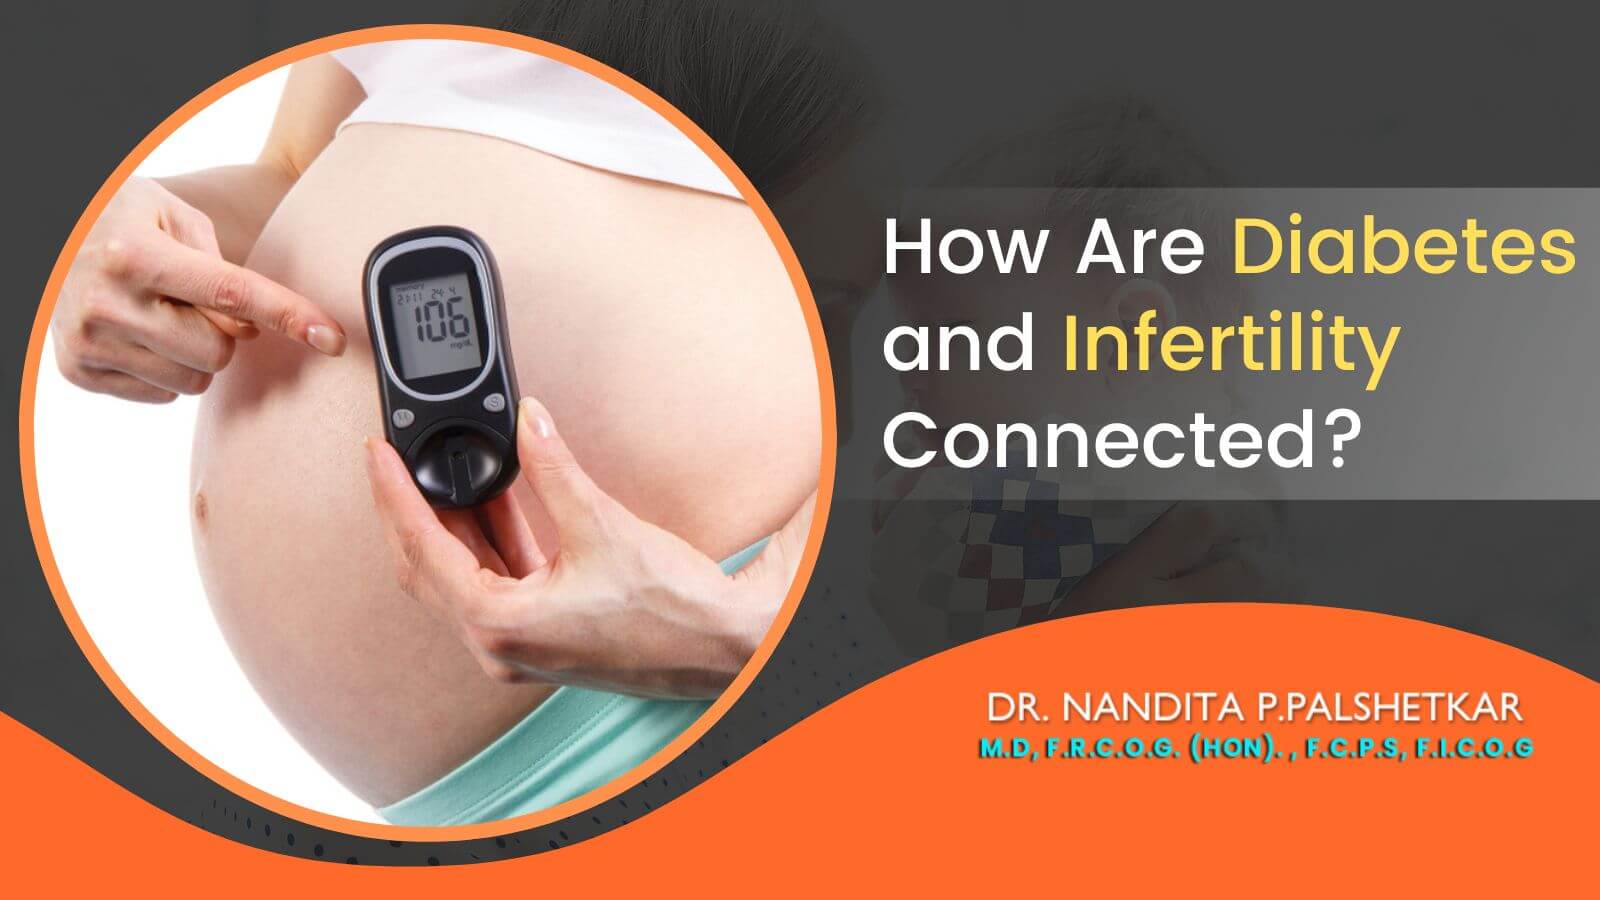 How Are Diabetes and Infertility Connected?